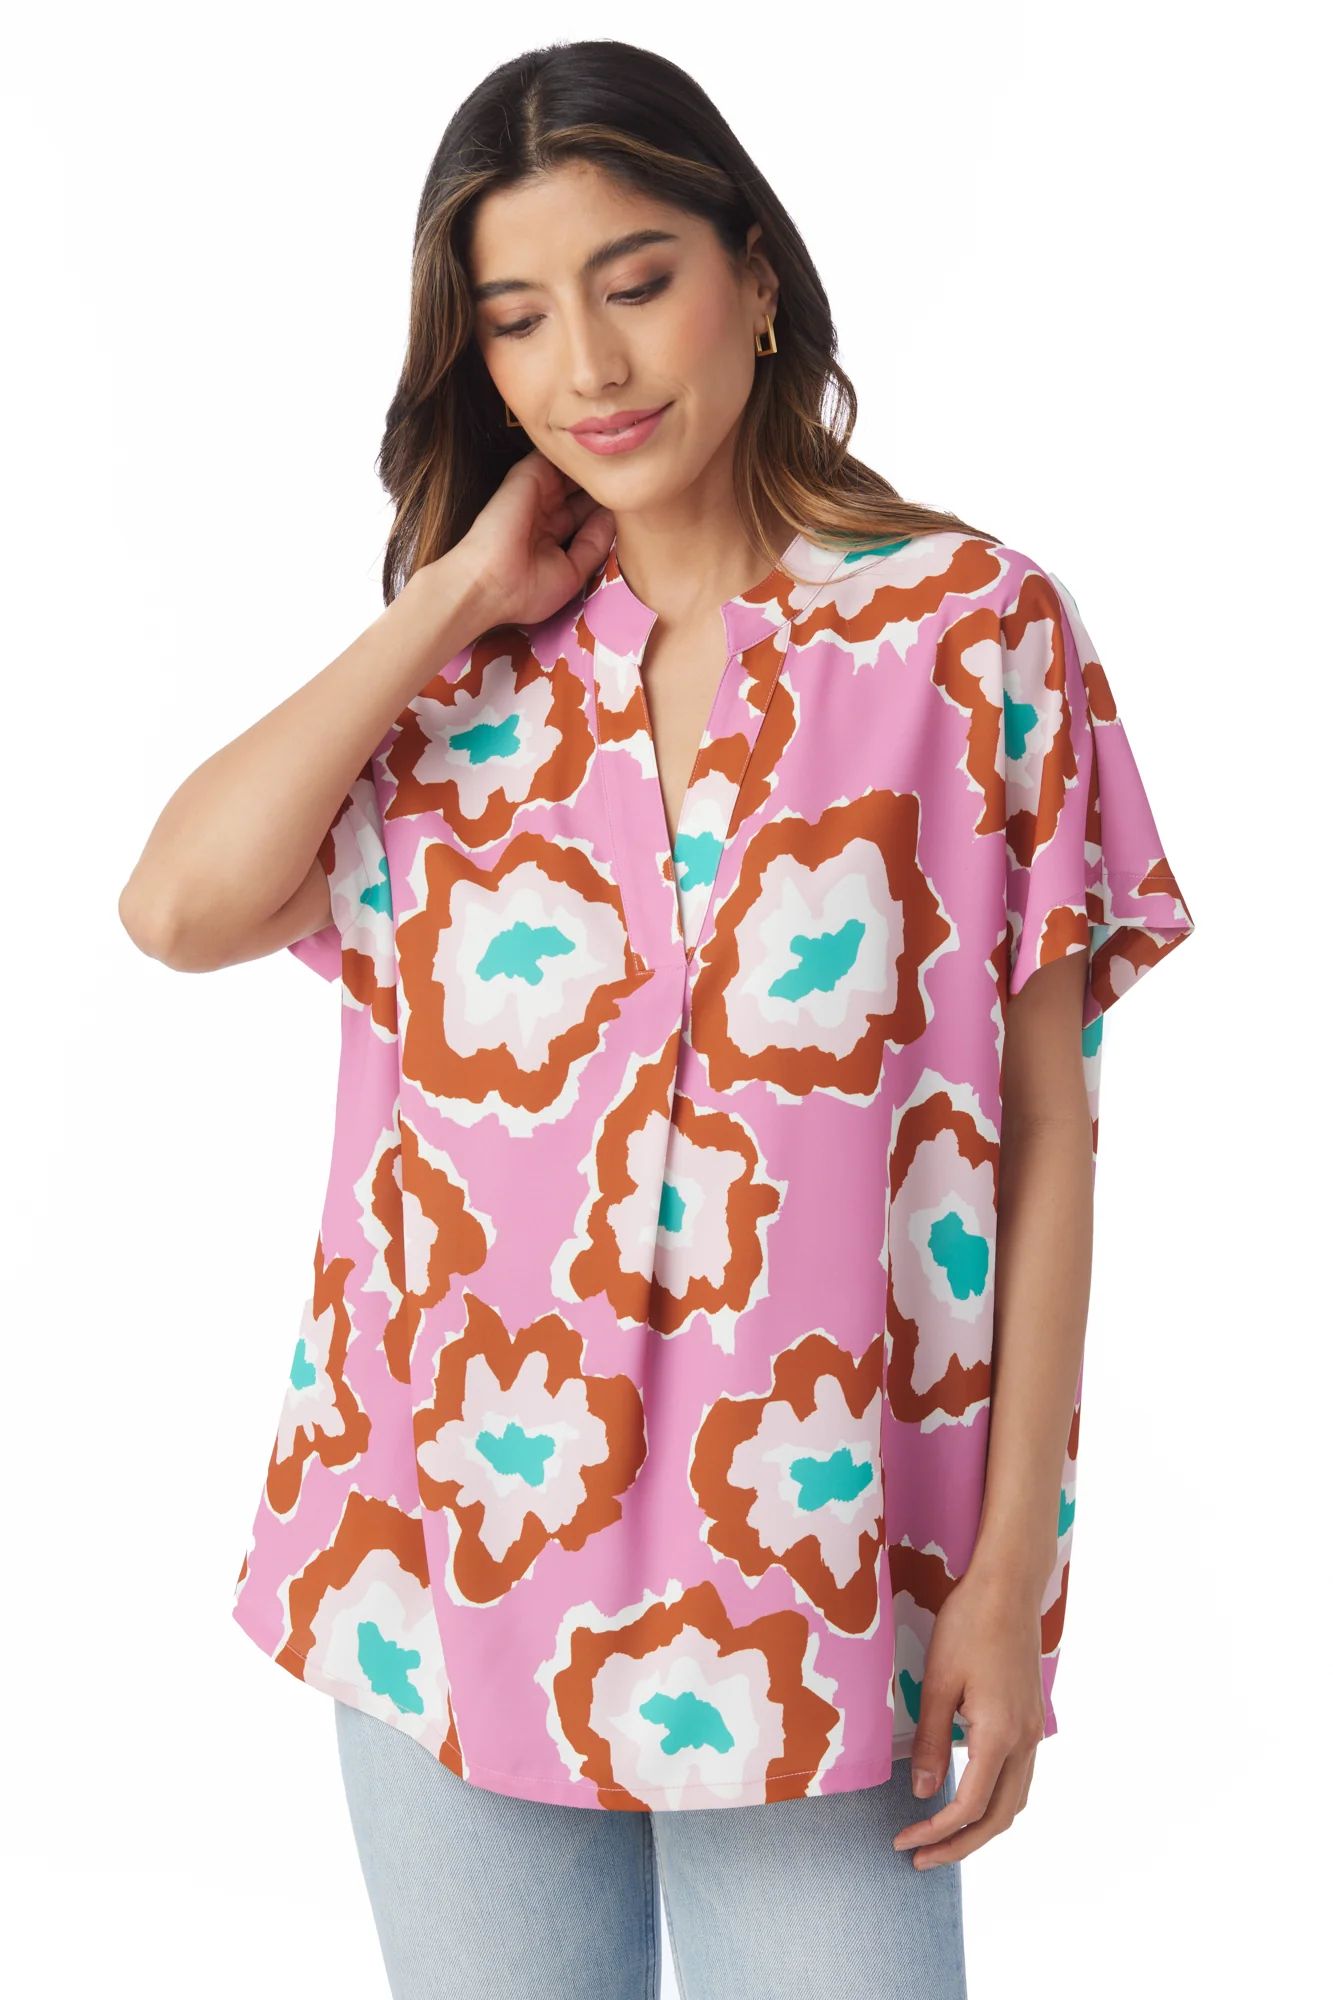 Ines Tunic in Bloom Boom | CROSBY by Mollie Burch | CROSBY by Mollie Burch